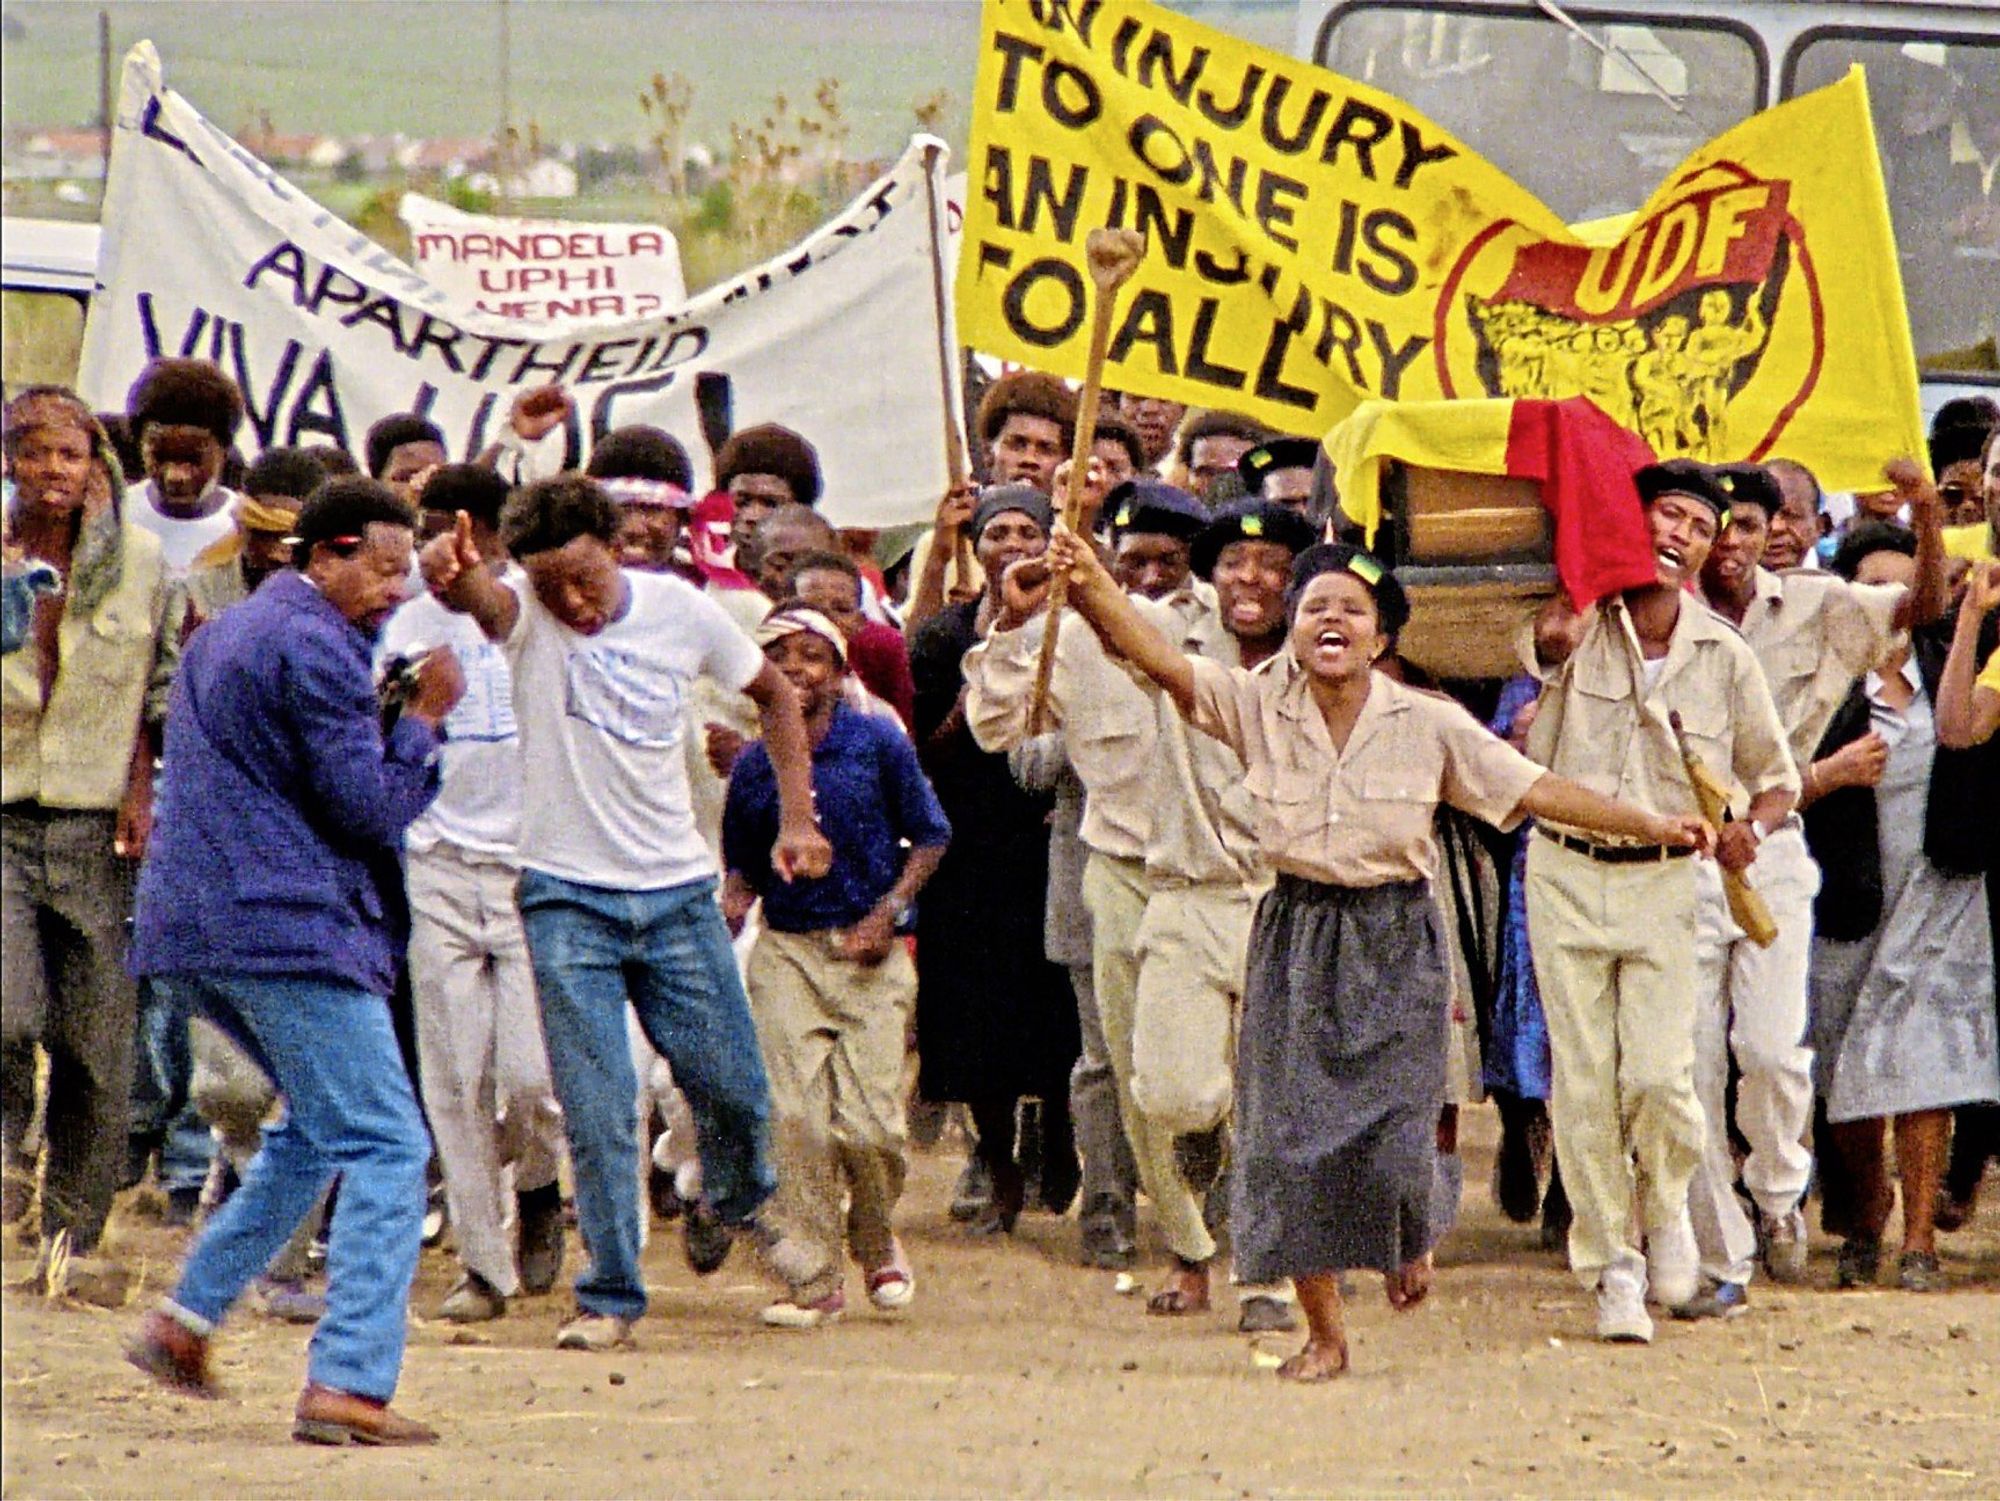 A still from the film, Mapantsula, of people protesting.